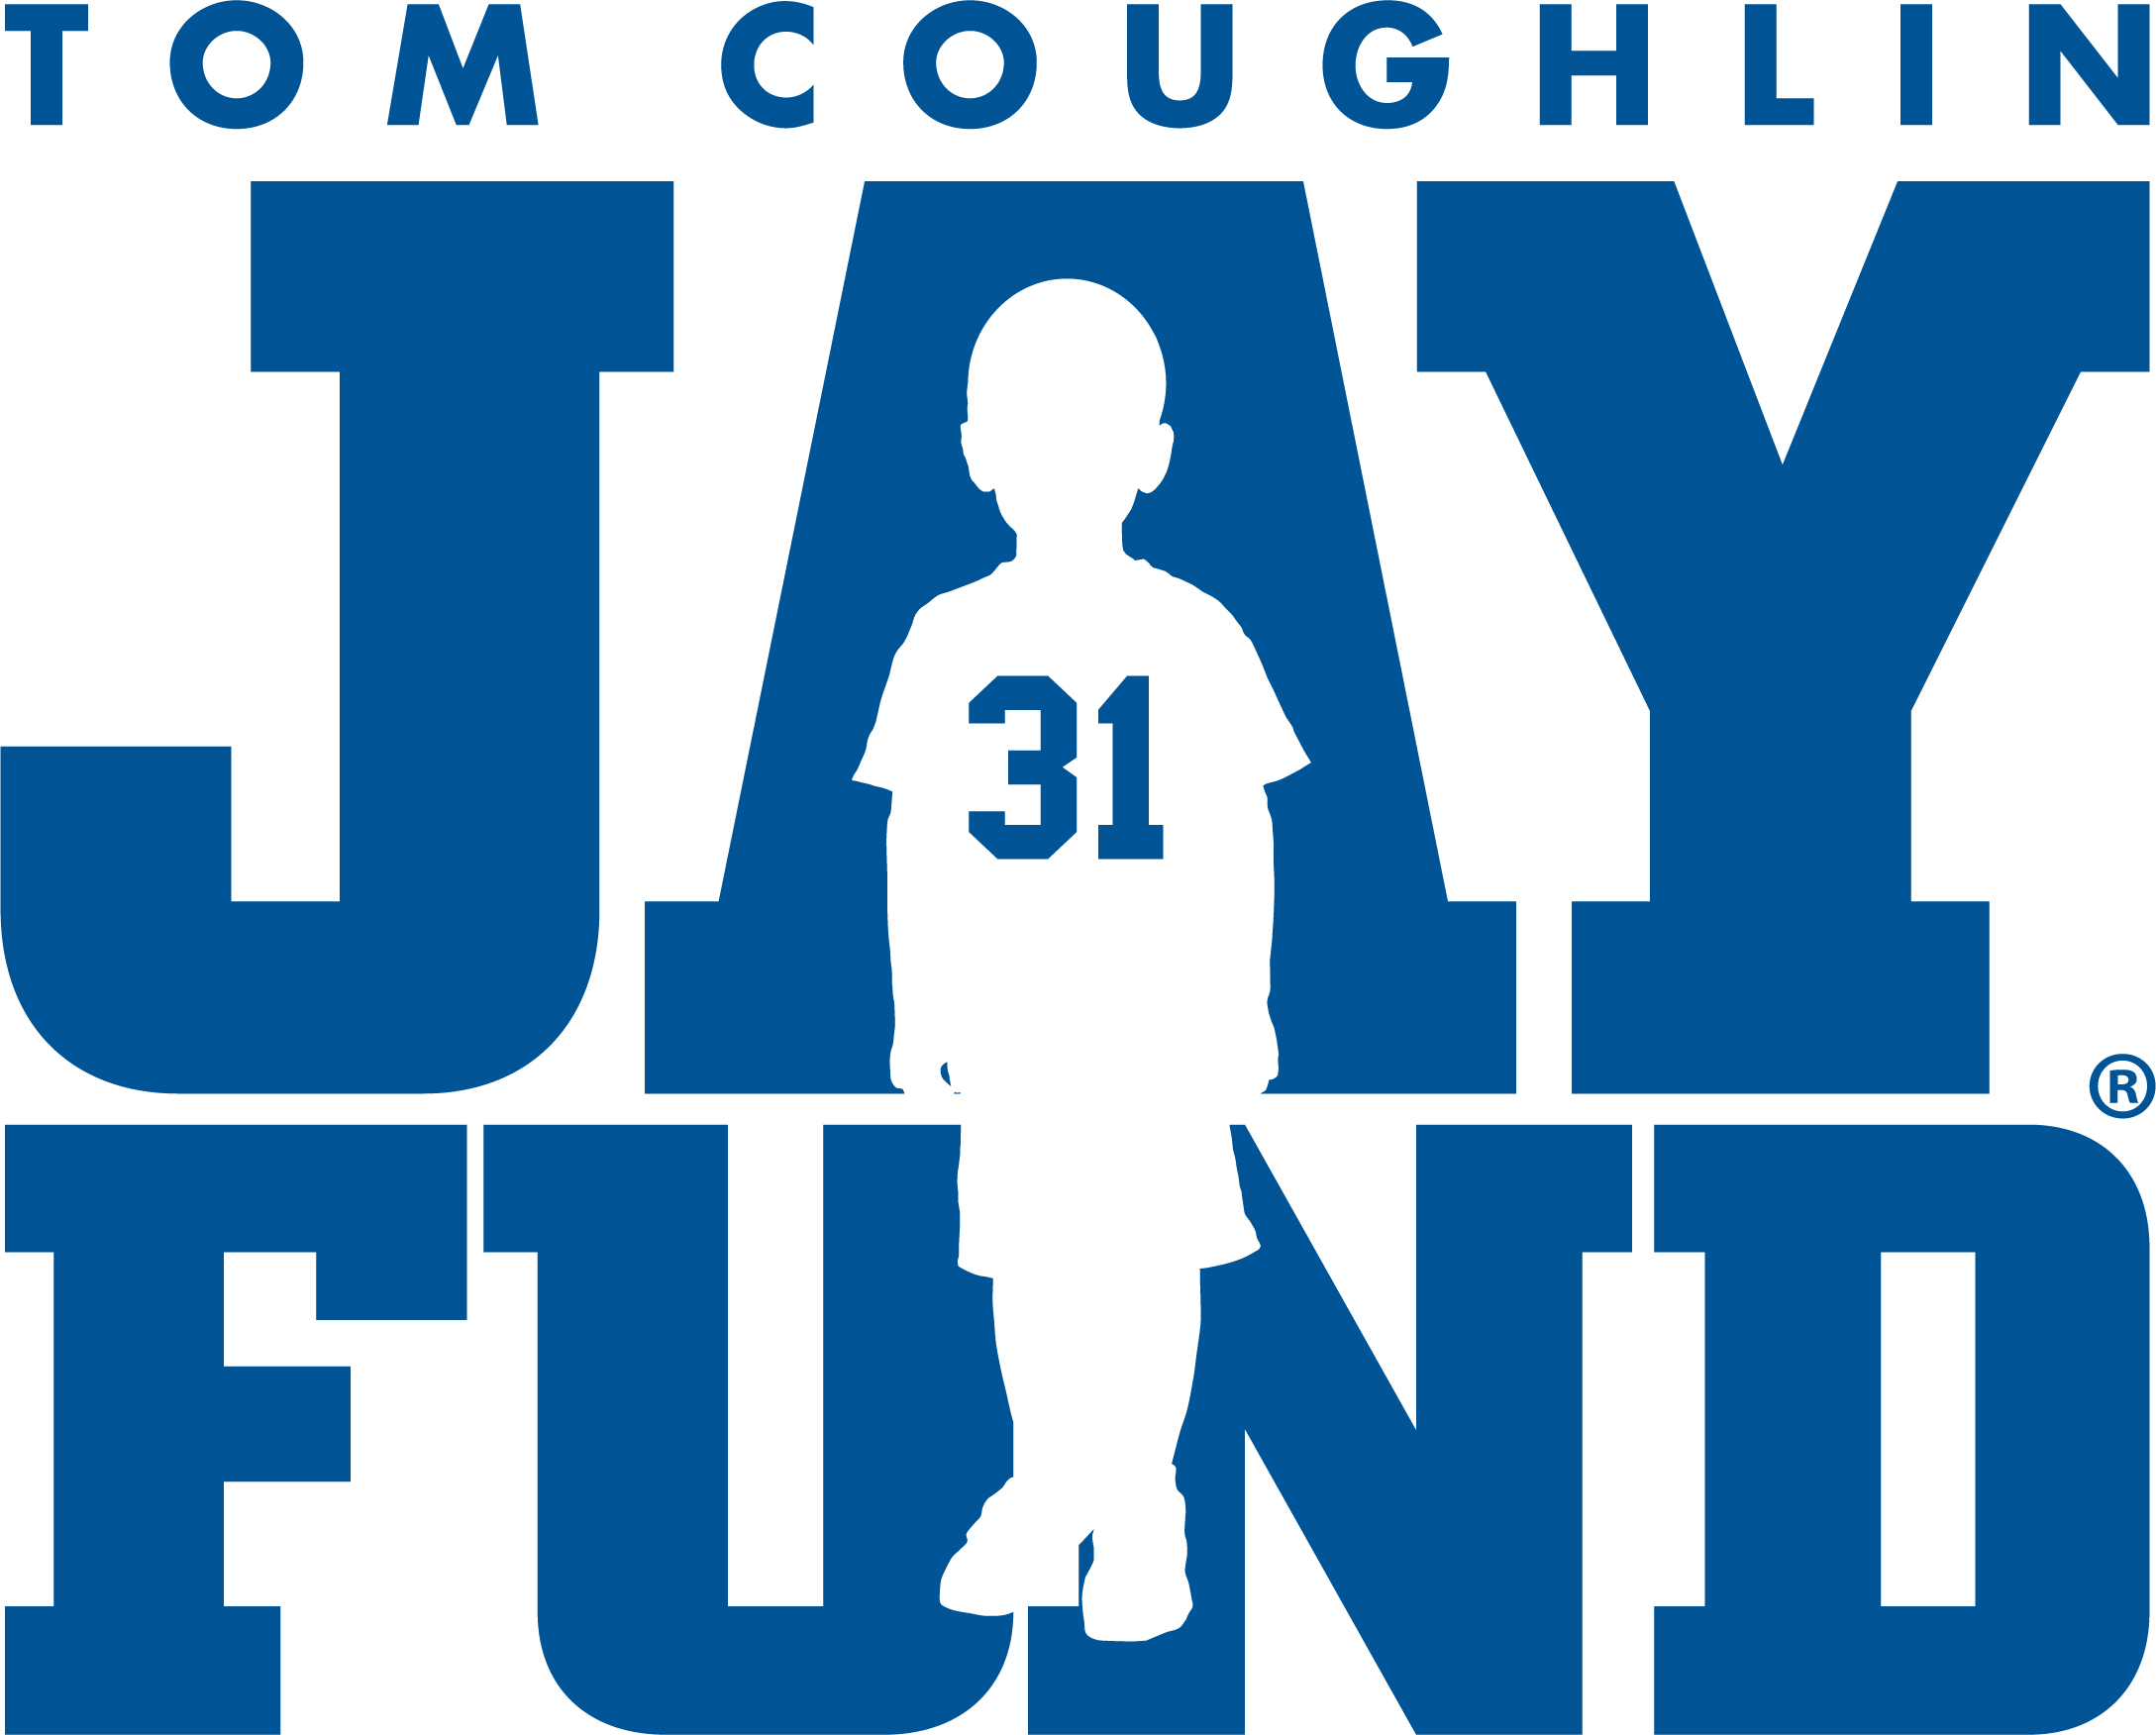 Tom Coughlin Jay Fund